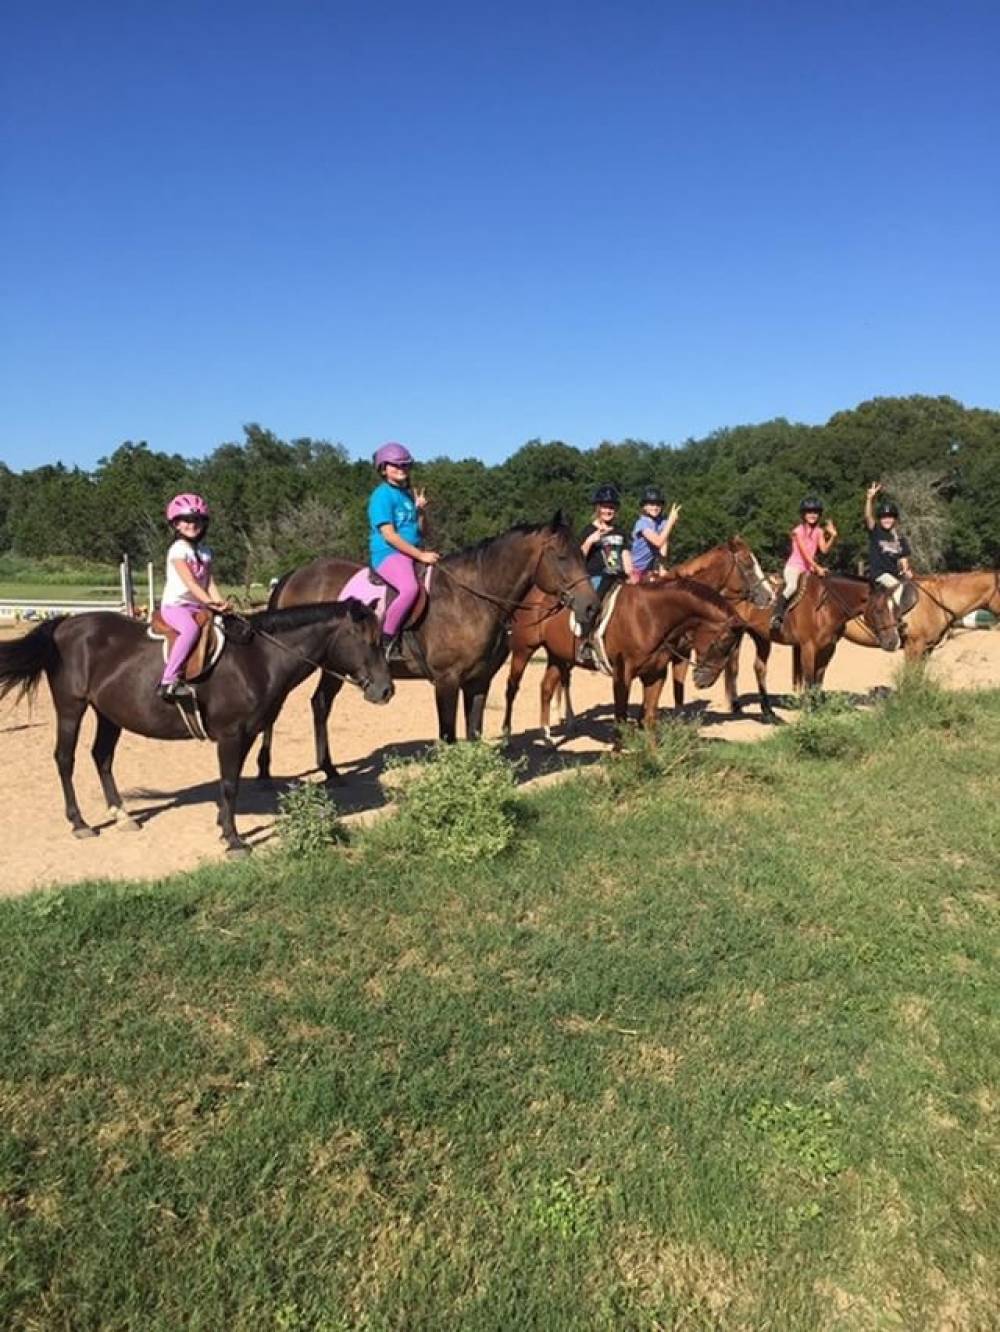 TOP TEXAS EQUESTRIAN CAMP: Hunters Chase Farms Inc. is a Top Equestrian Summer Camp located in Wimberley Texas offering many fun and enriching Equestrian and other camp programs. Hunters Chase Farms Inc. also offers CIT/LIT and/or Teen Leadership Opportunities, too.